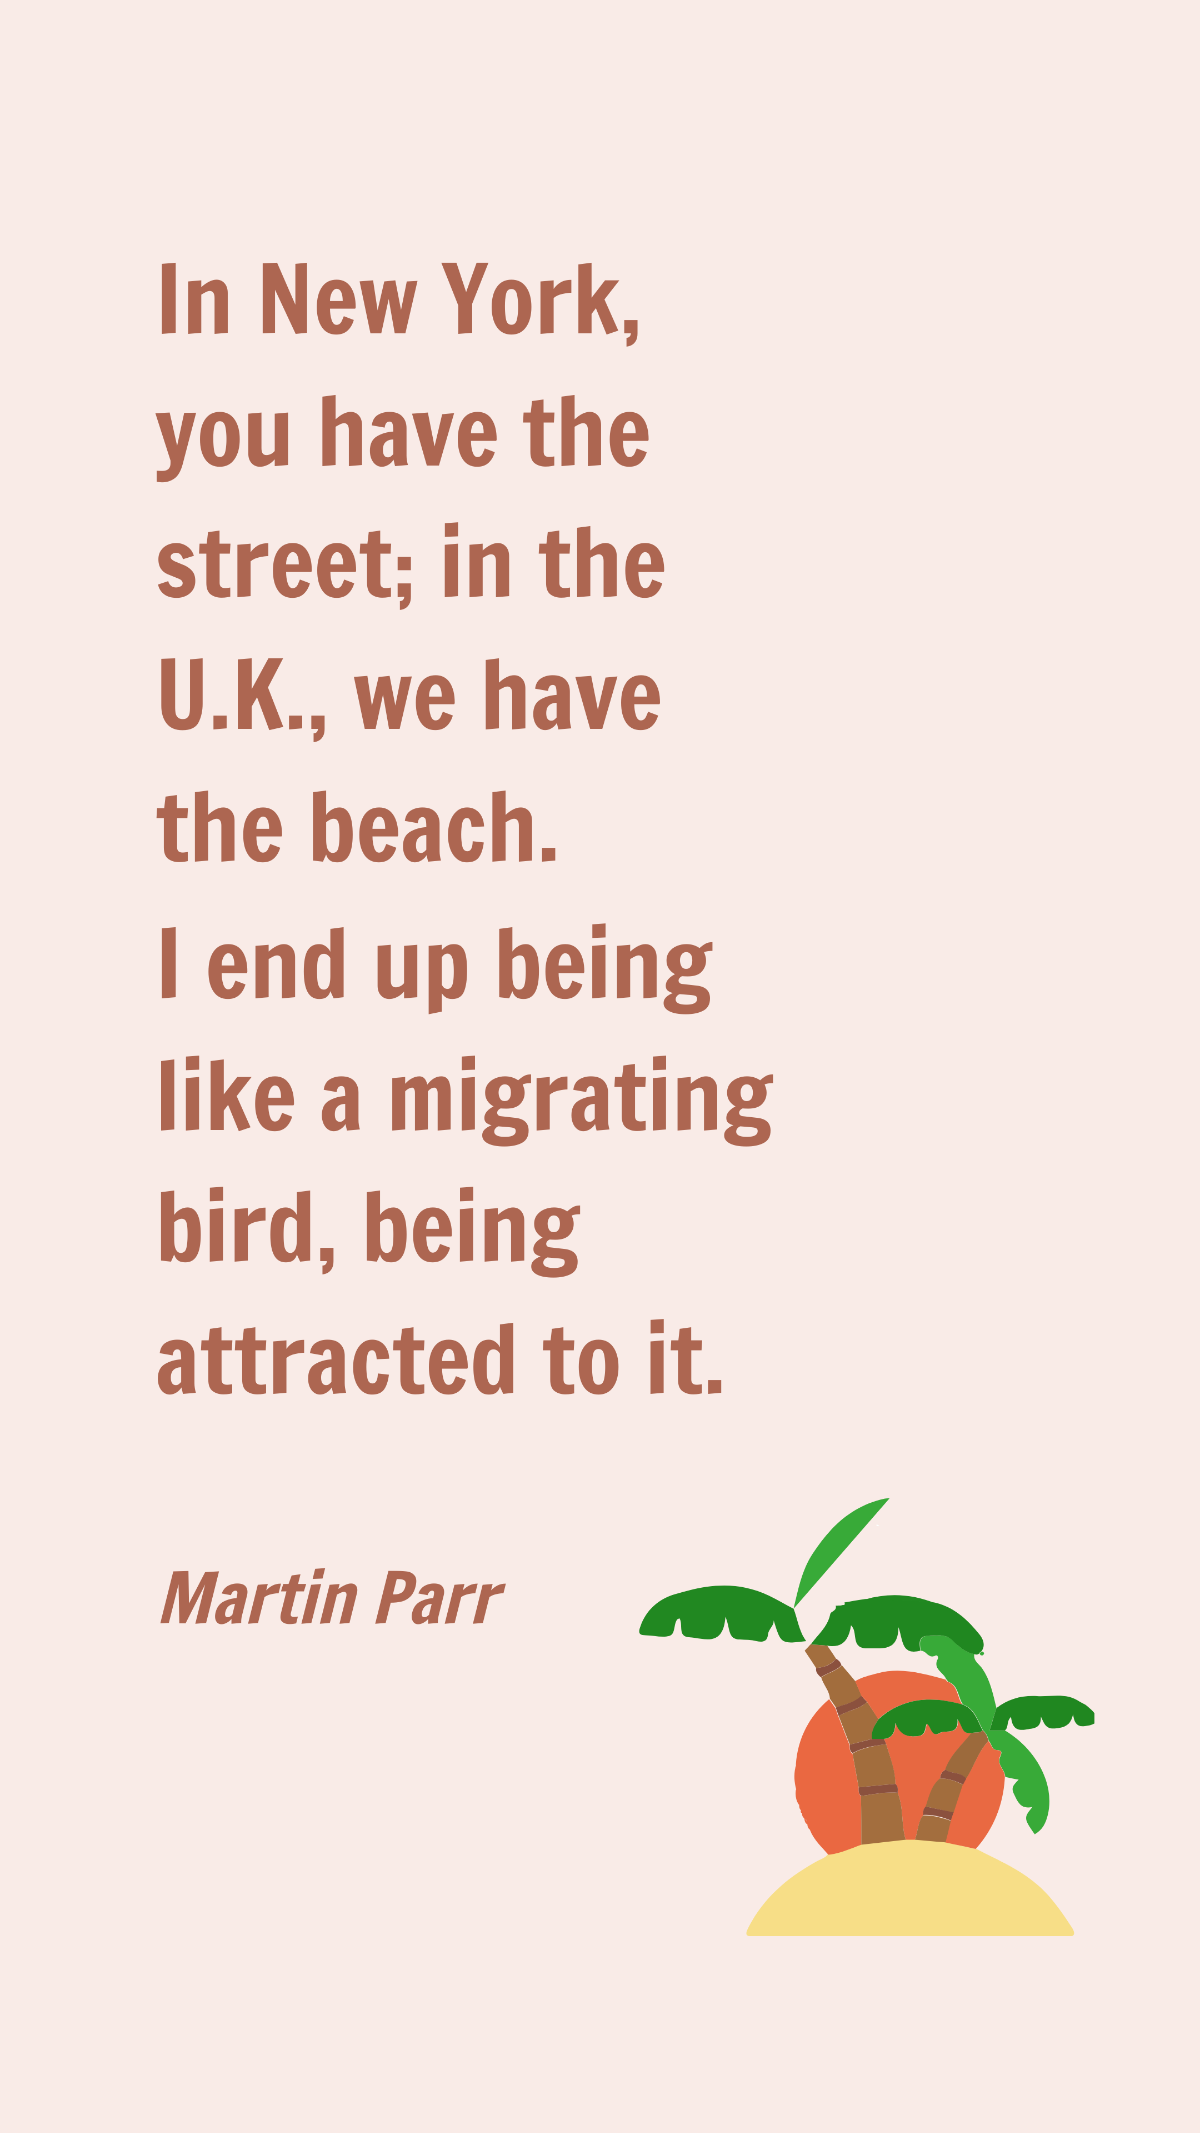 Martin Parr - In New York, you have the street; in the U.K., we have the beach. I end up being like a migrating bird, being attracted to it. Template